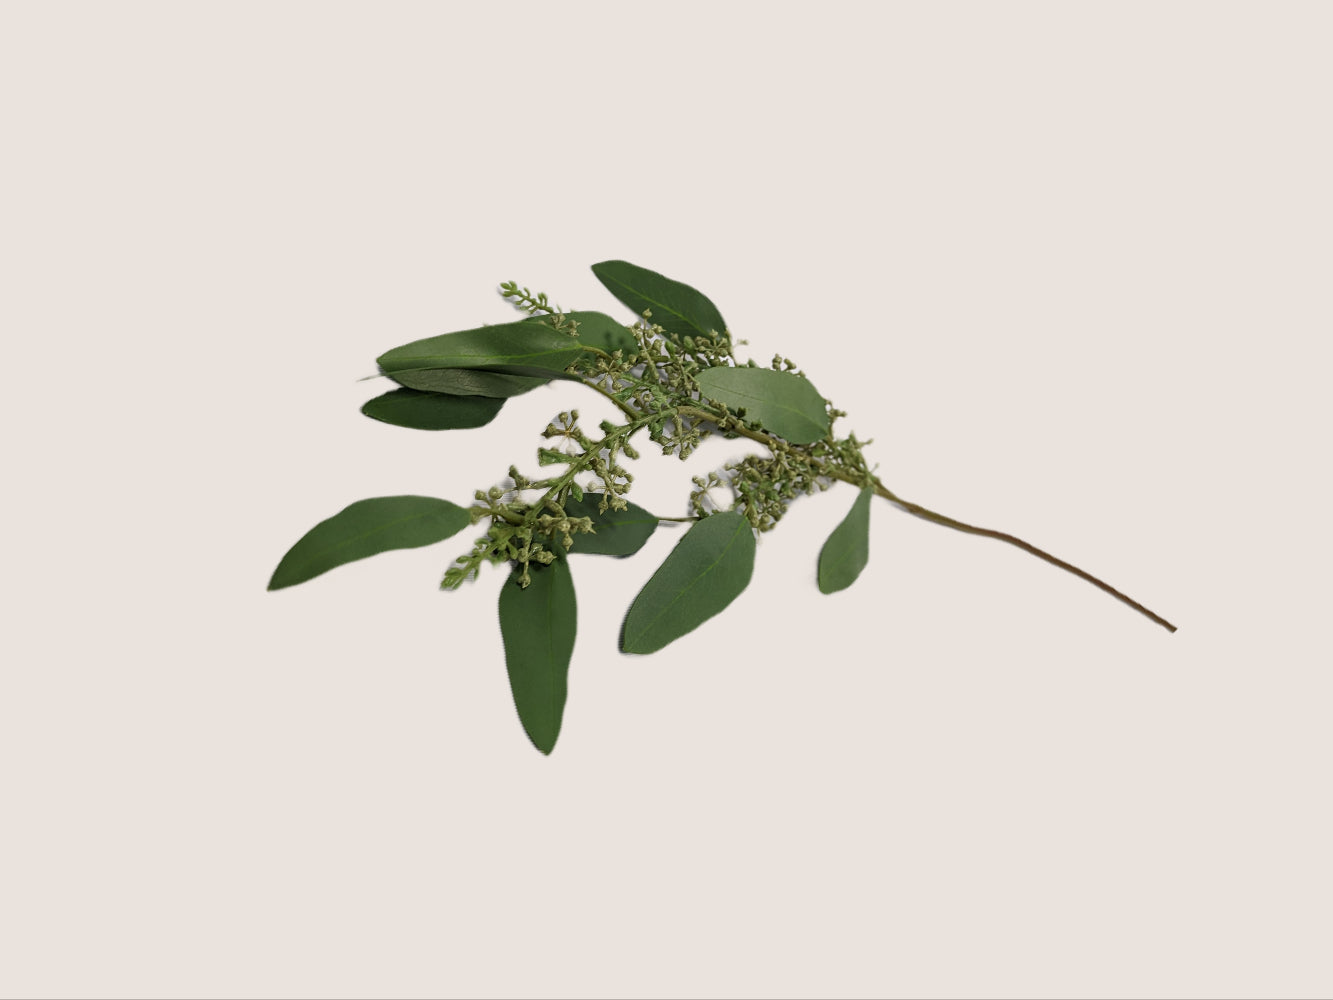 An image of a single artificial seeded eucalyptus branch against a white background. The branch is 28 inches long and features lifelike sage green leaves with realistic veining and texture. The seeded eucalyptus branch adds natural and organic charm to any floral arrangement or home decor. The image showcases the intricate details and lifelike appearance of the artificial branch, including the color, texture, and shape of the leaves.